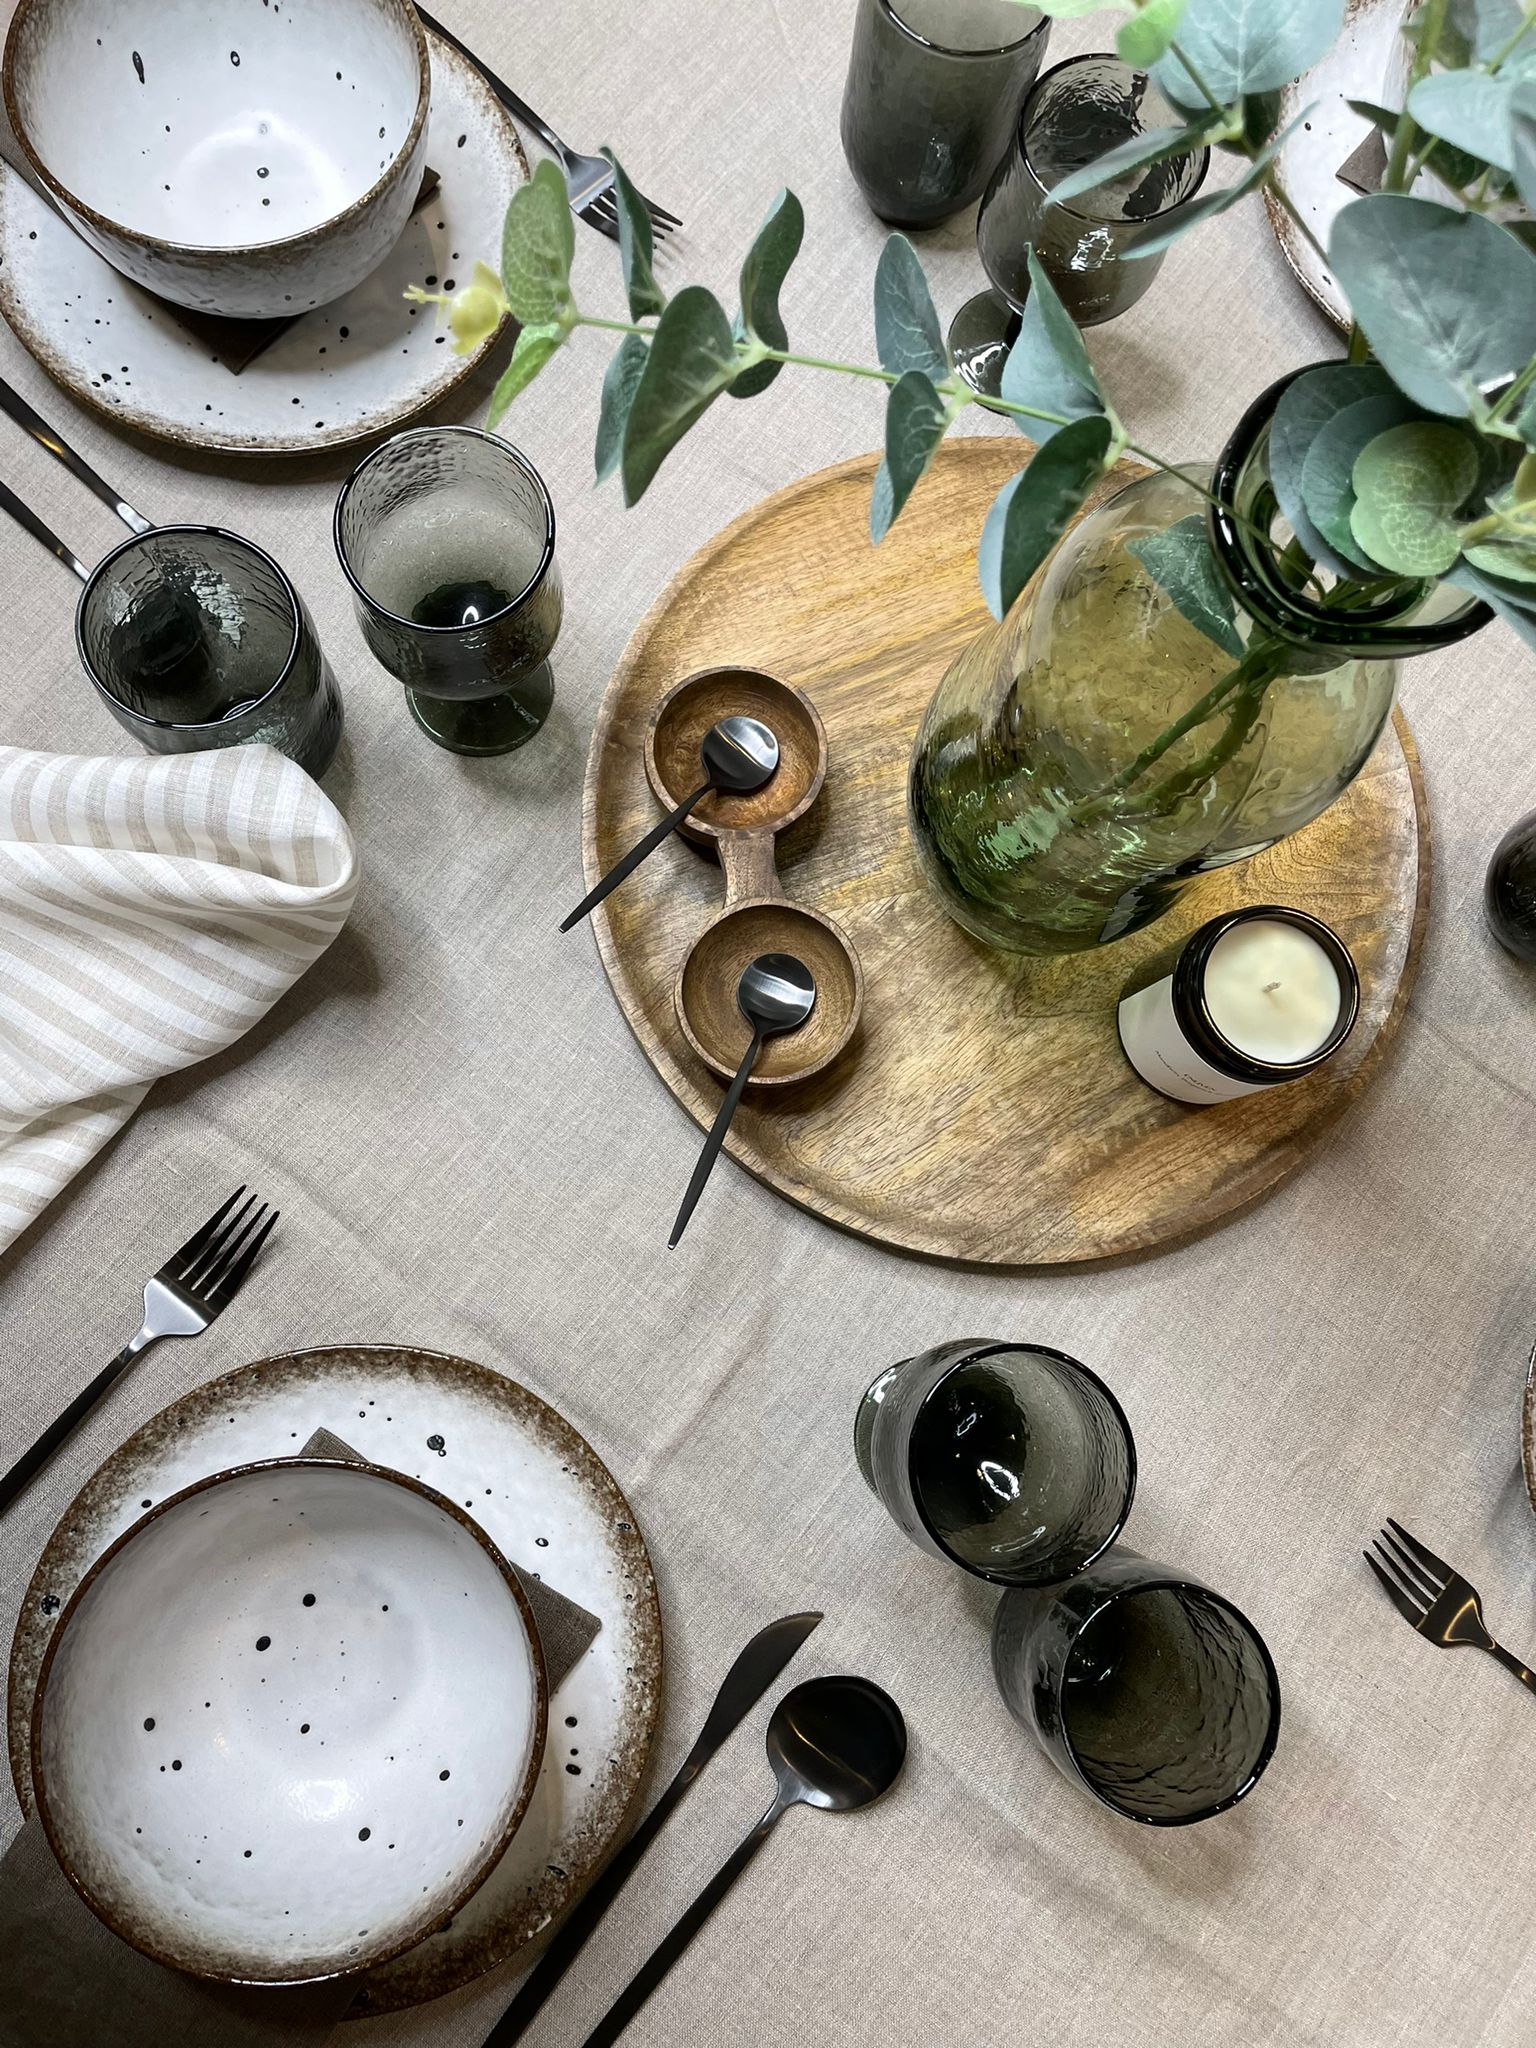 table setting with white and brown speckled bowls and plates, dark steel cutlery, grey glasses and wooden board in the centre with green glass vase and foliage